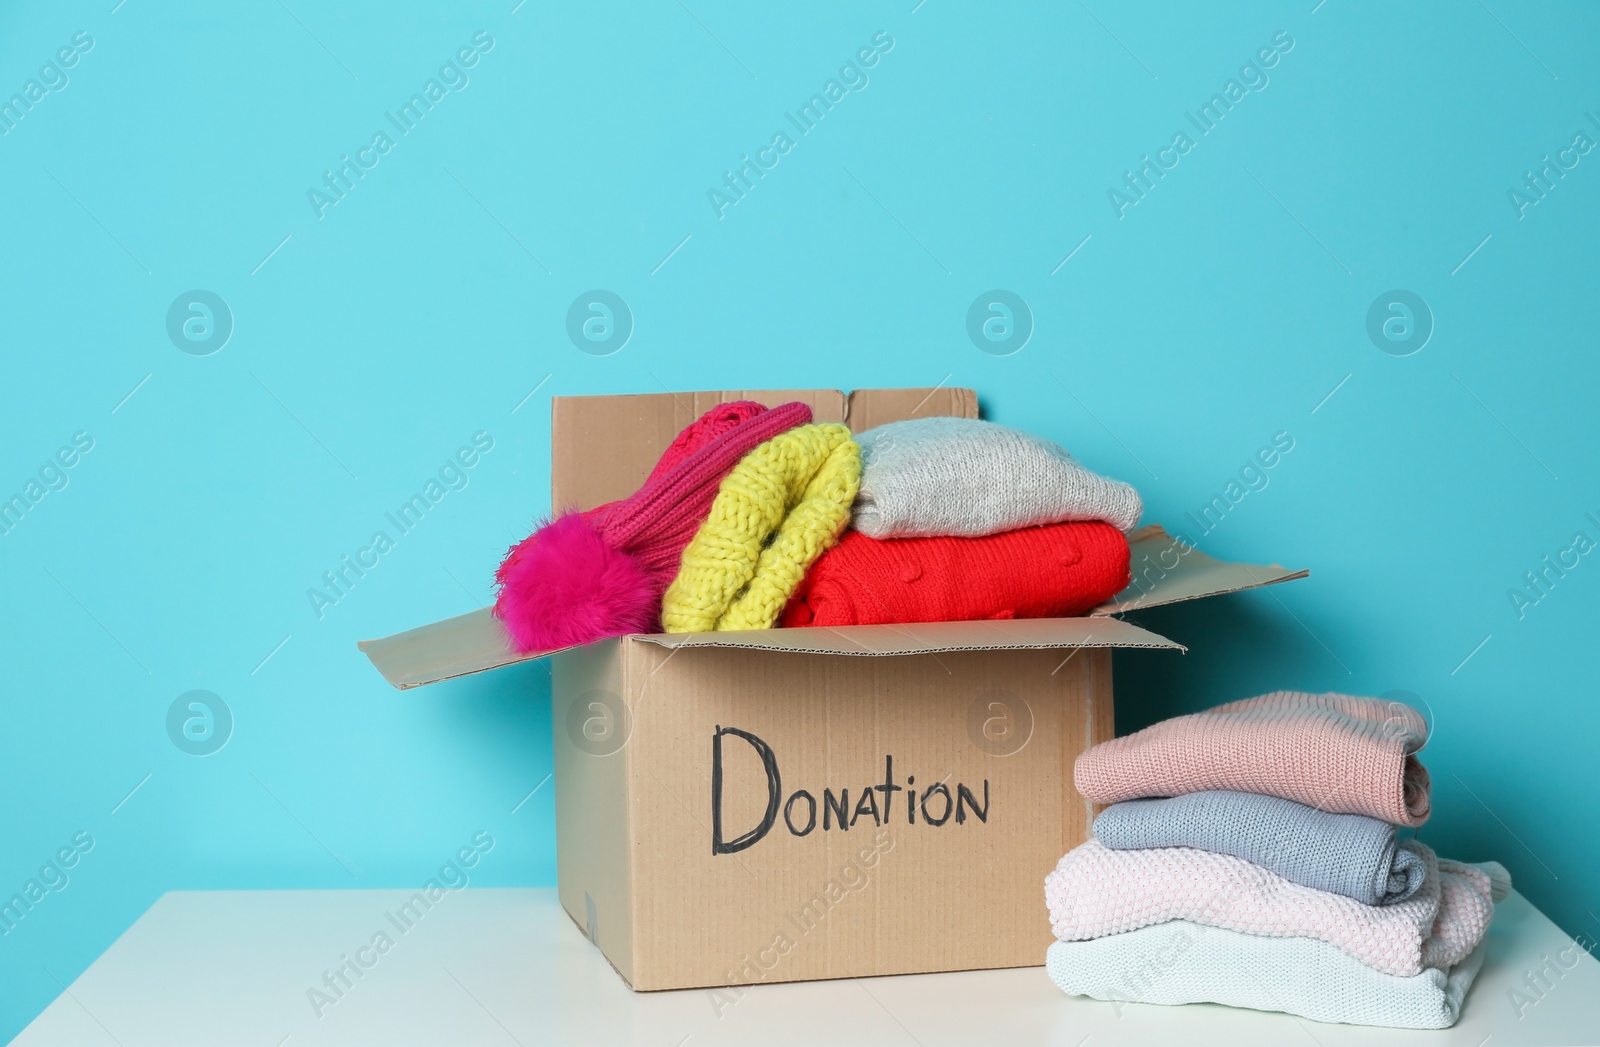 Photo of Donation box and knitted clothes on table against color background